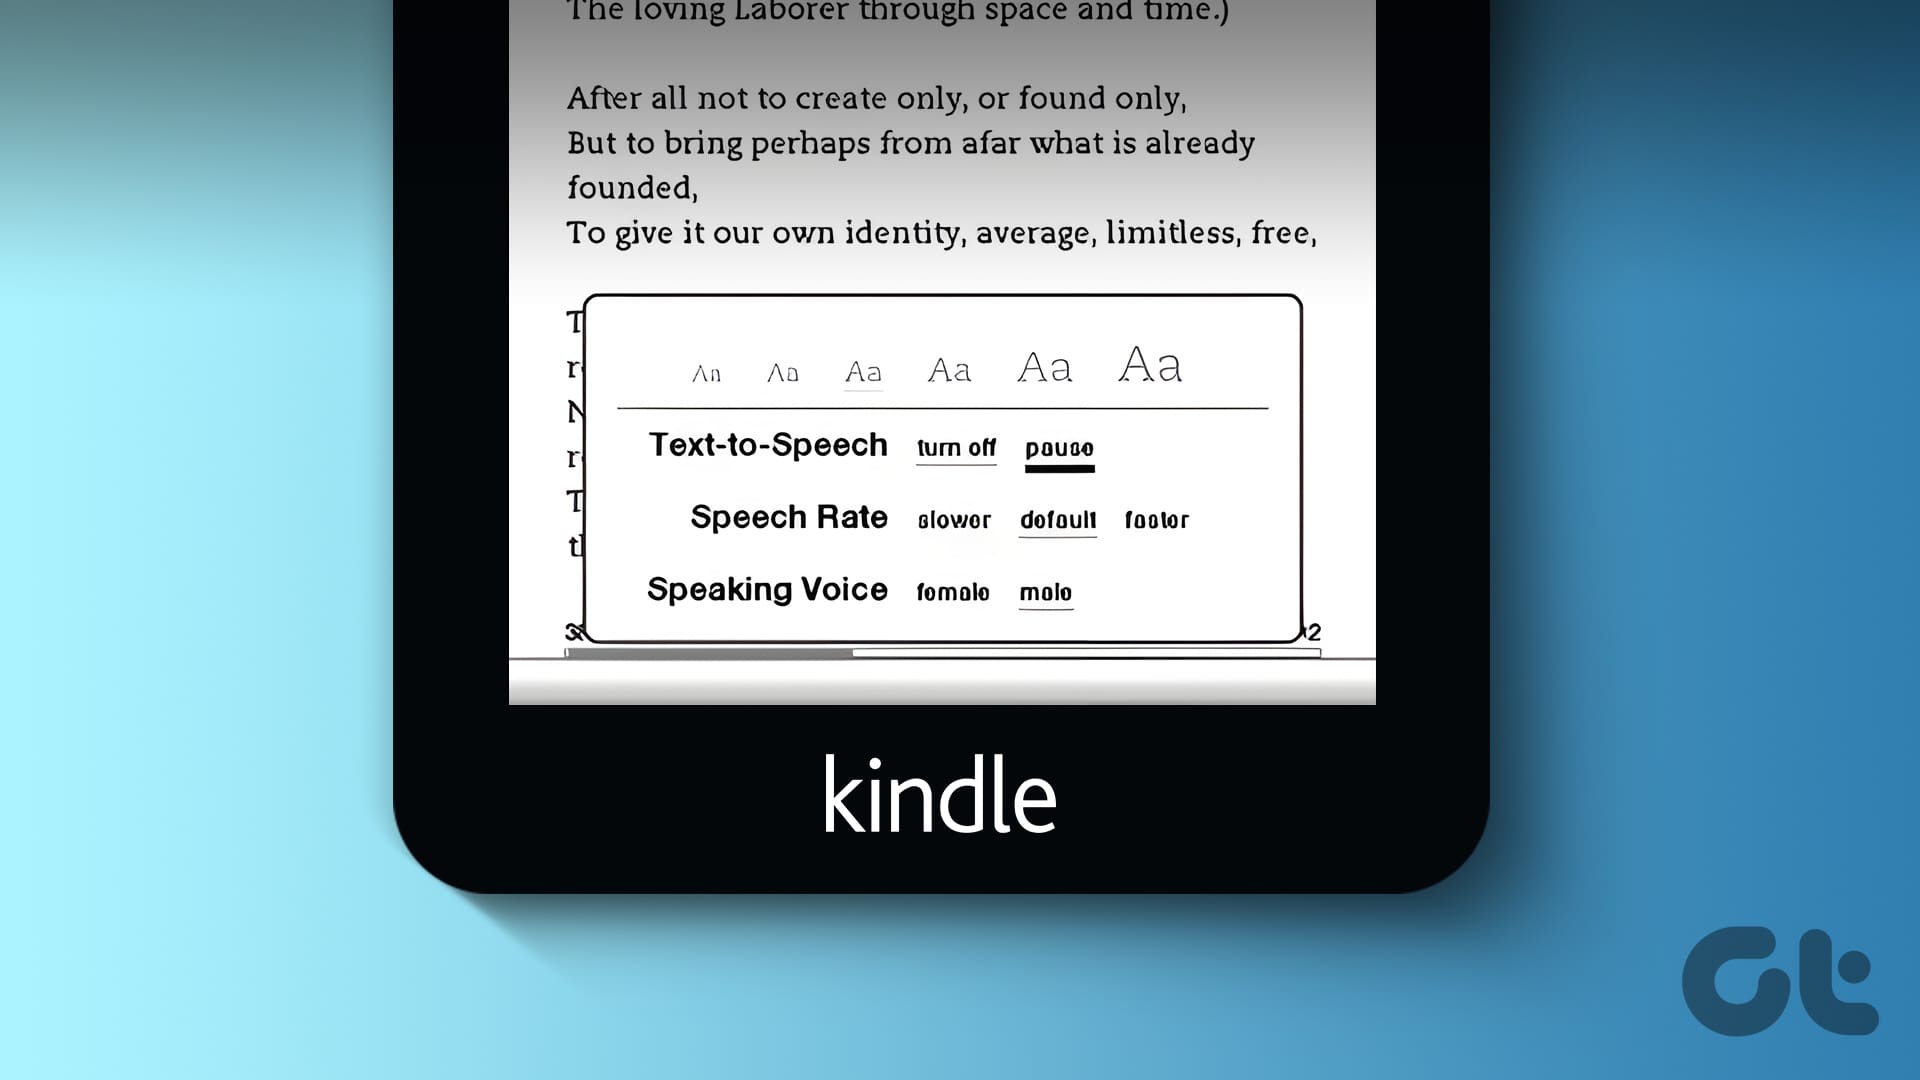 How to Turn Off a Kindle Paperwhite